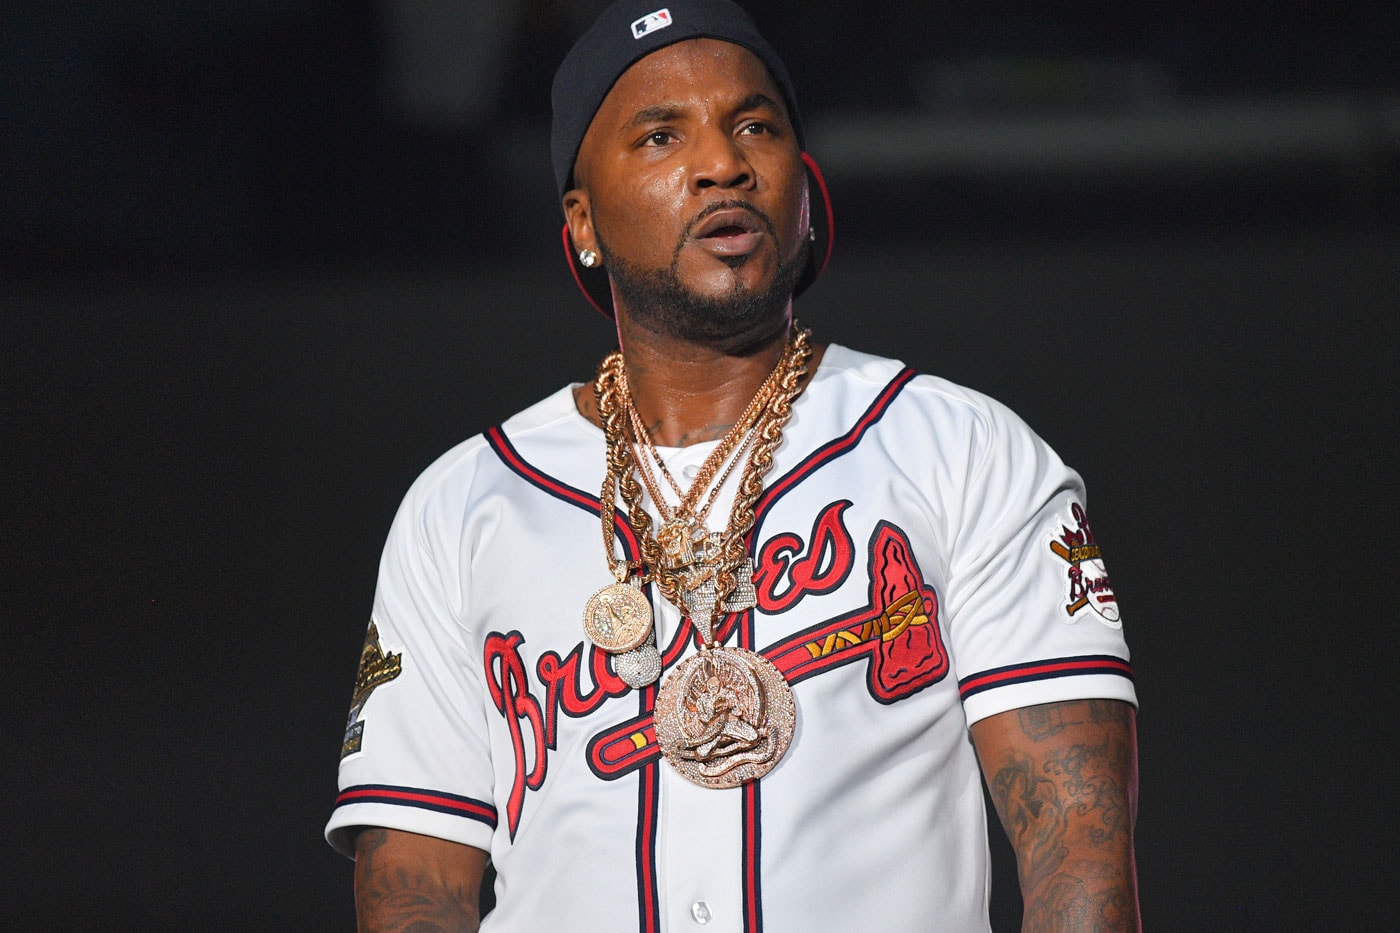 Jeezy Going Crazy Music Video Featuring French Montana Trap or Die 3